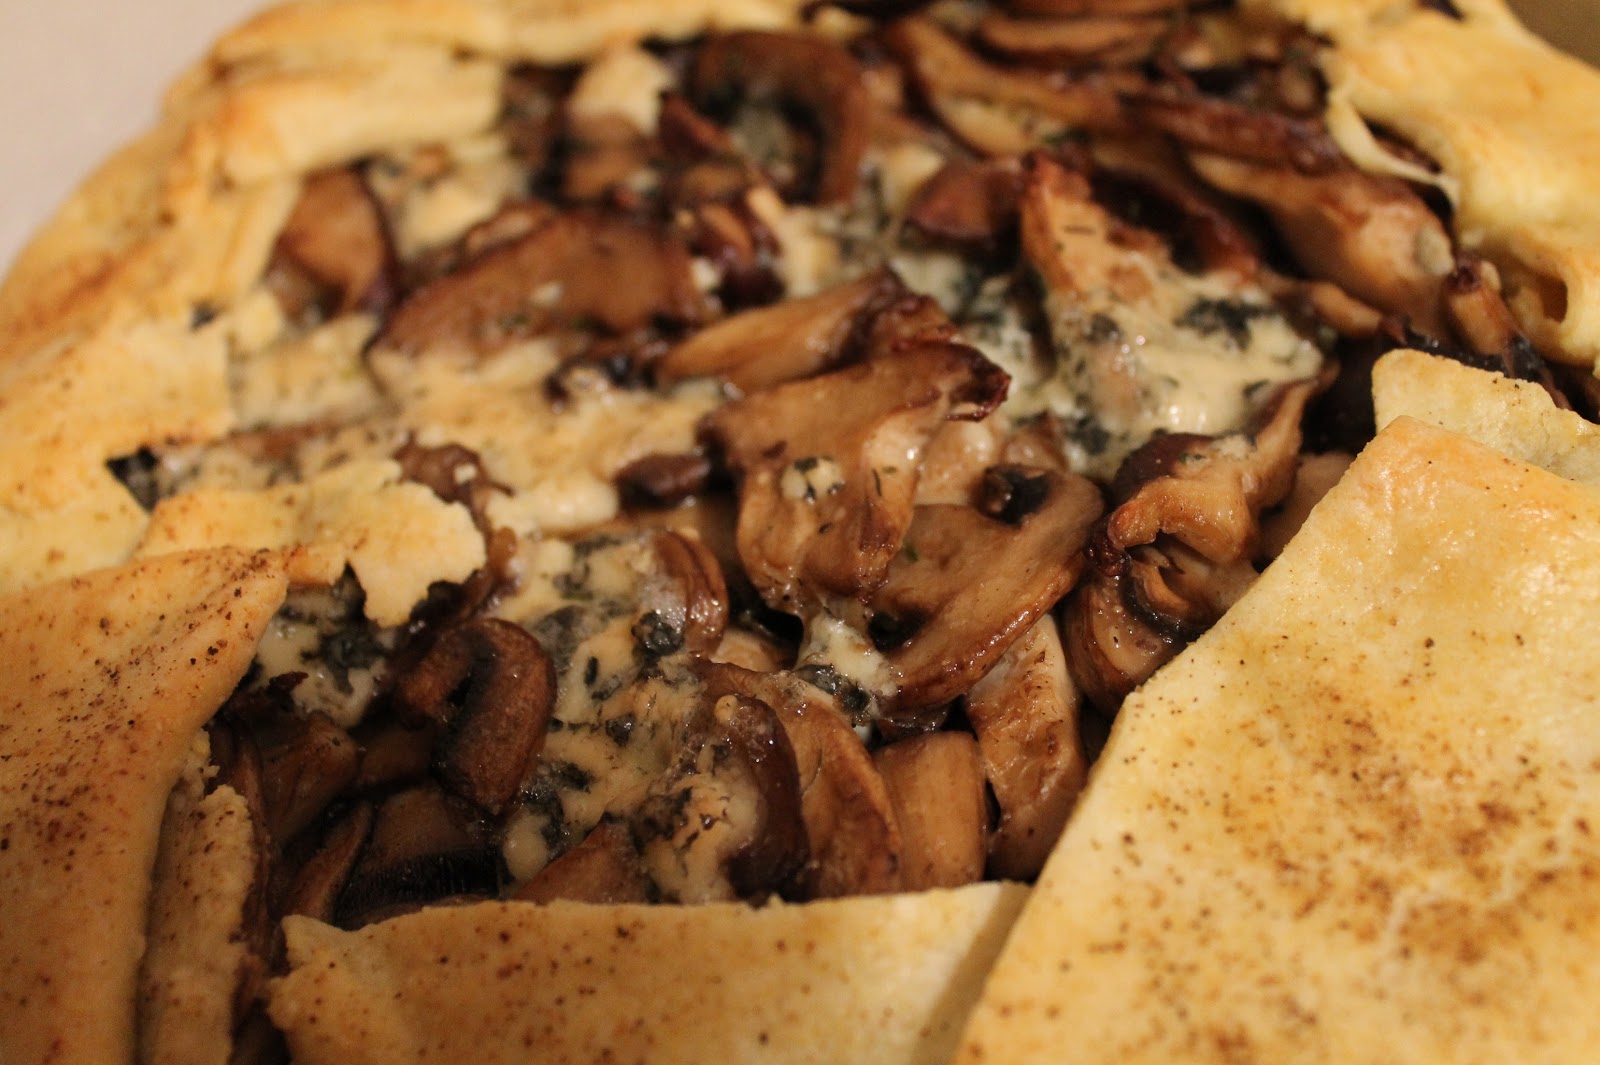 COOKING ON THE RIVER: MUSHROOM, BLUE CHEESE & FENNEL GALETTE